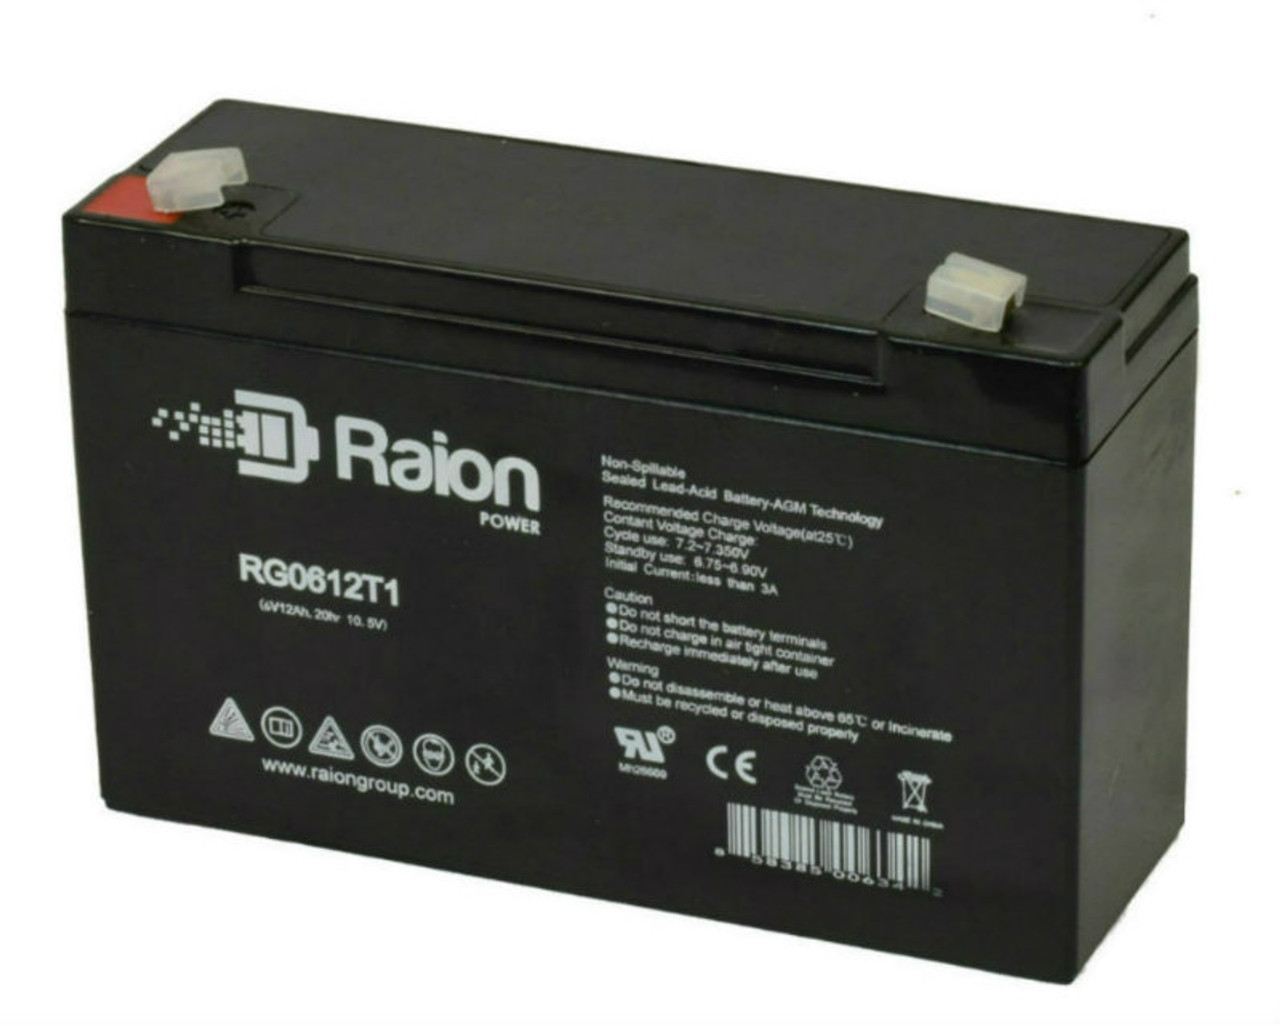 Raion Power RG06120T1 Replacement 6V 12Ah Emergency Light Battery for Light Alarms F12G1